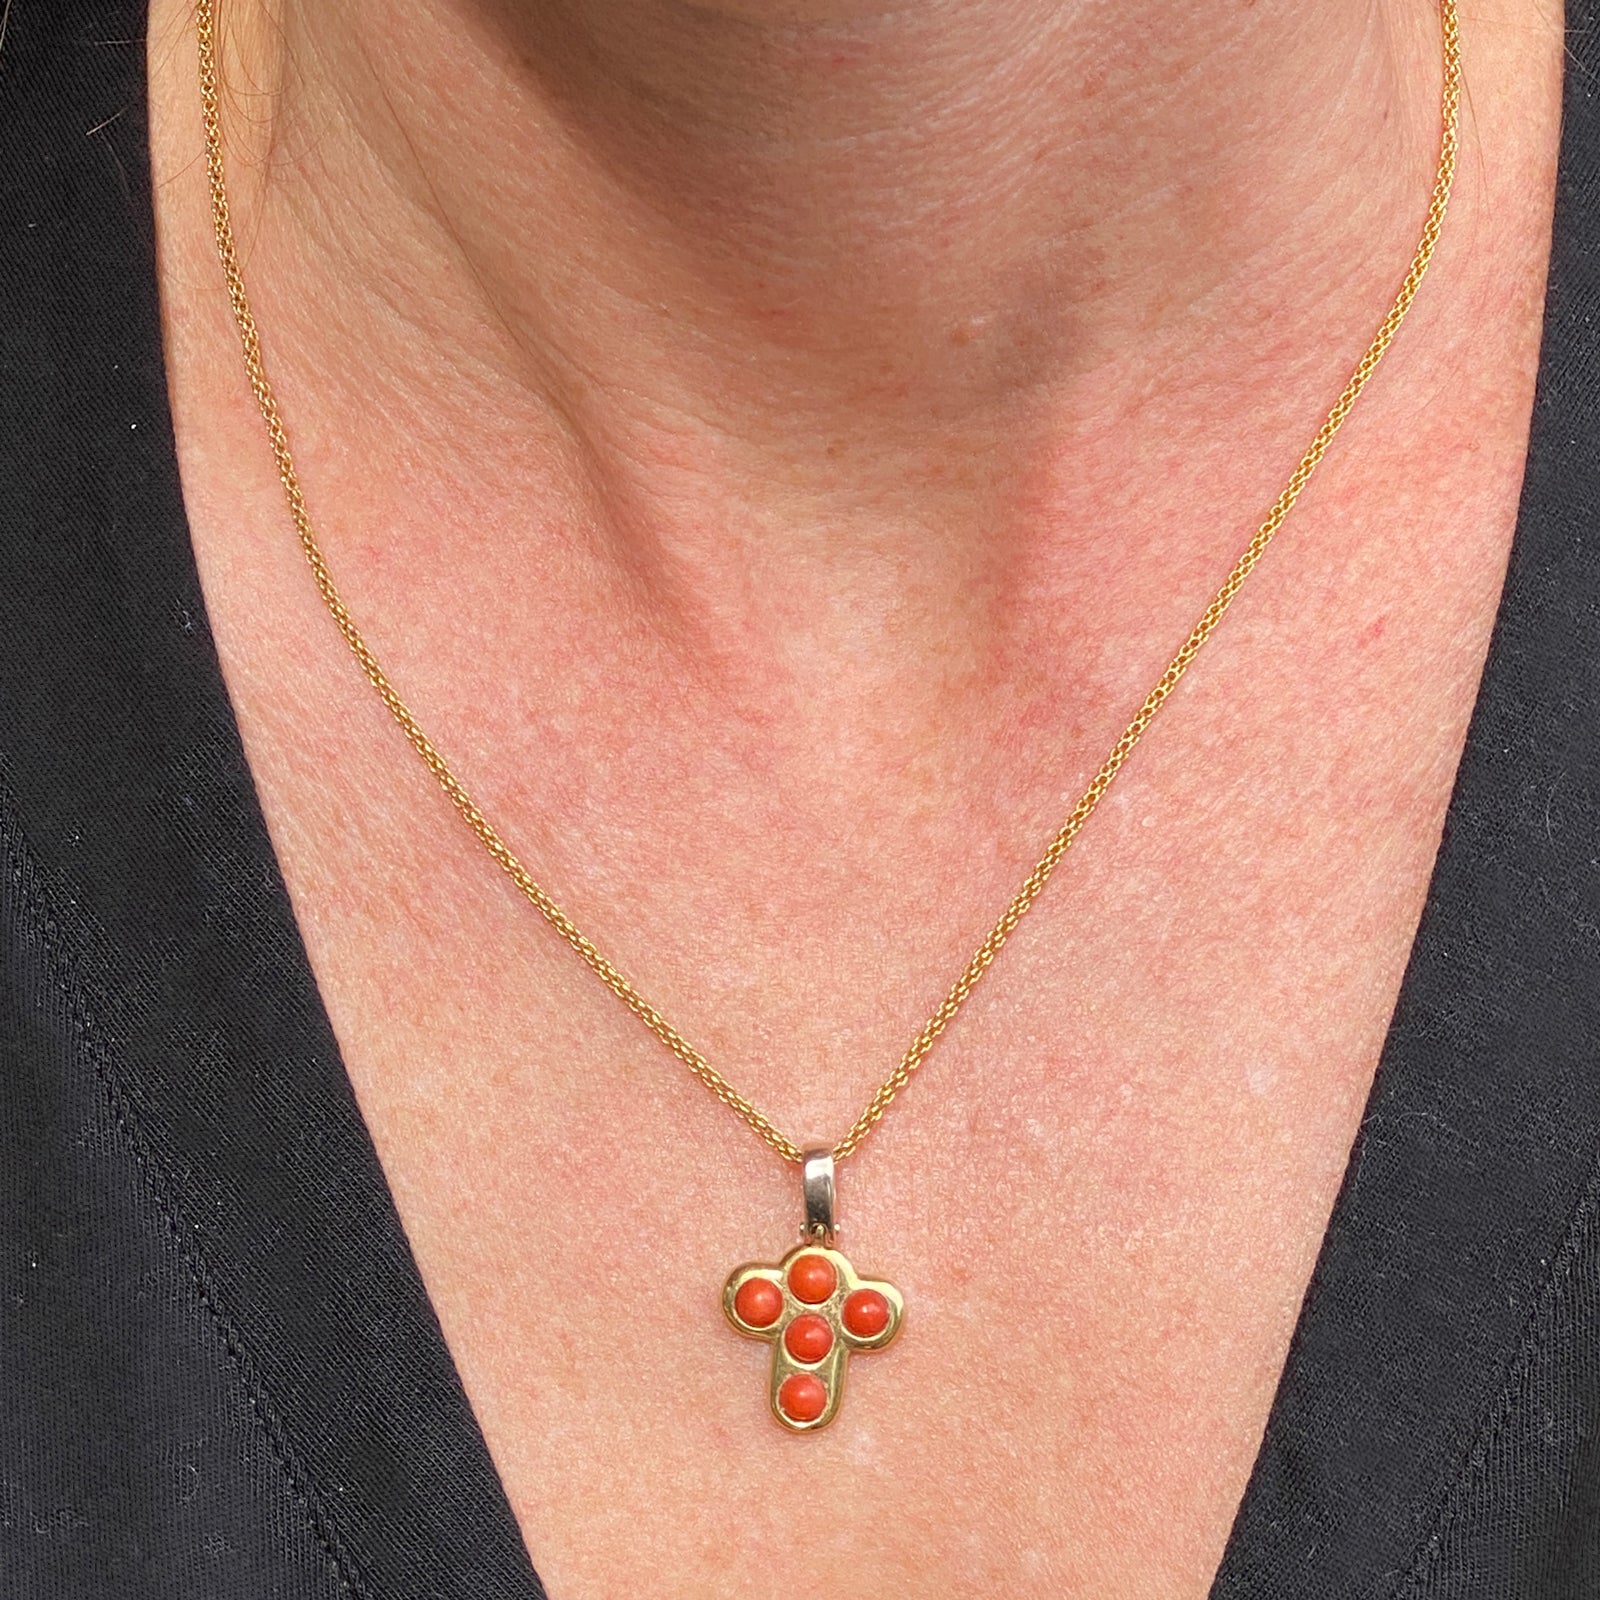 14K Solid Gold Italian Cross pendant with Figaro necklace Chain. | eBay